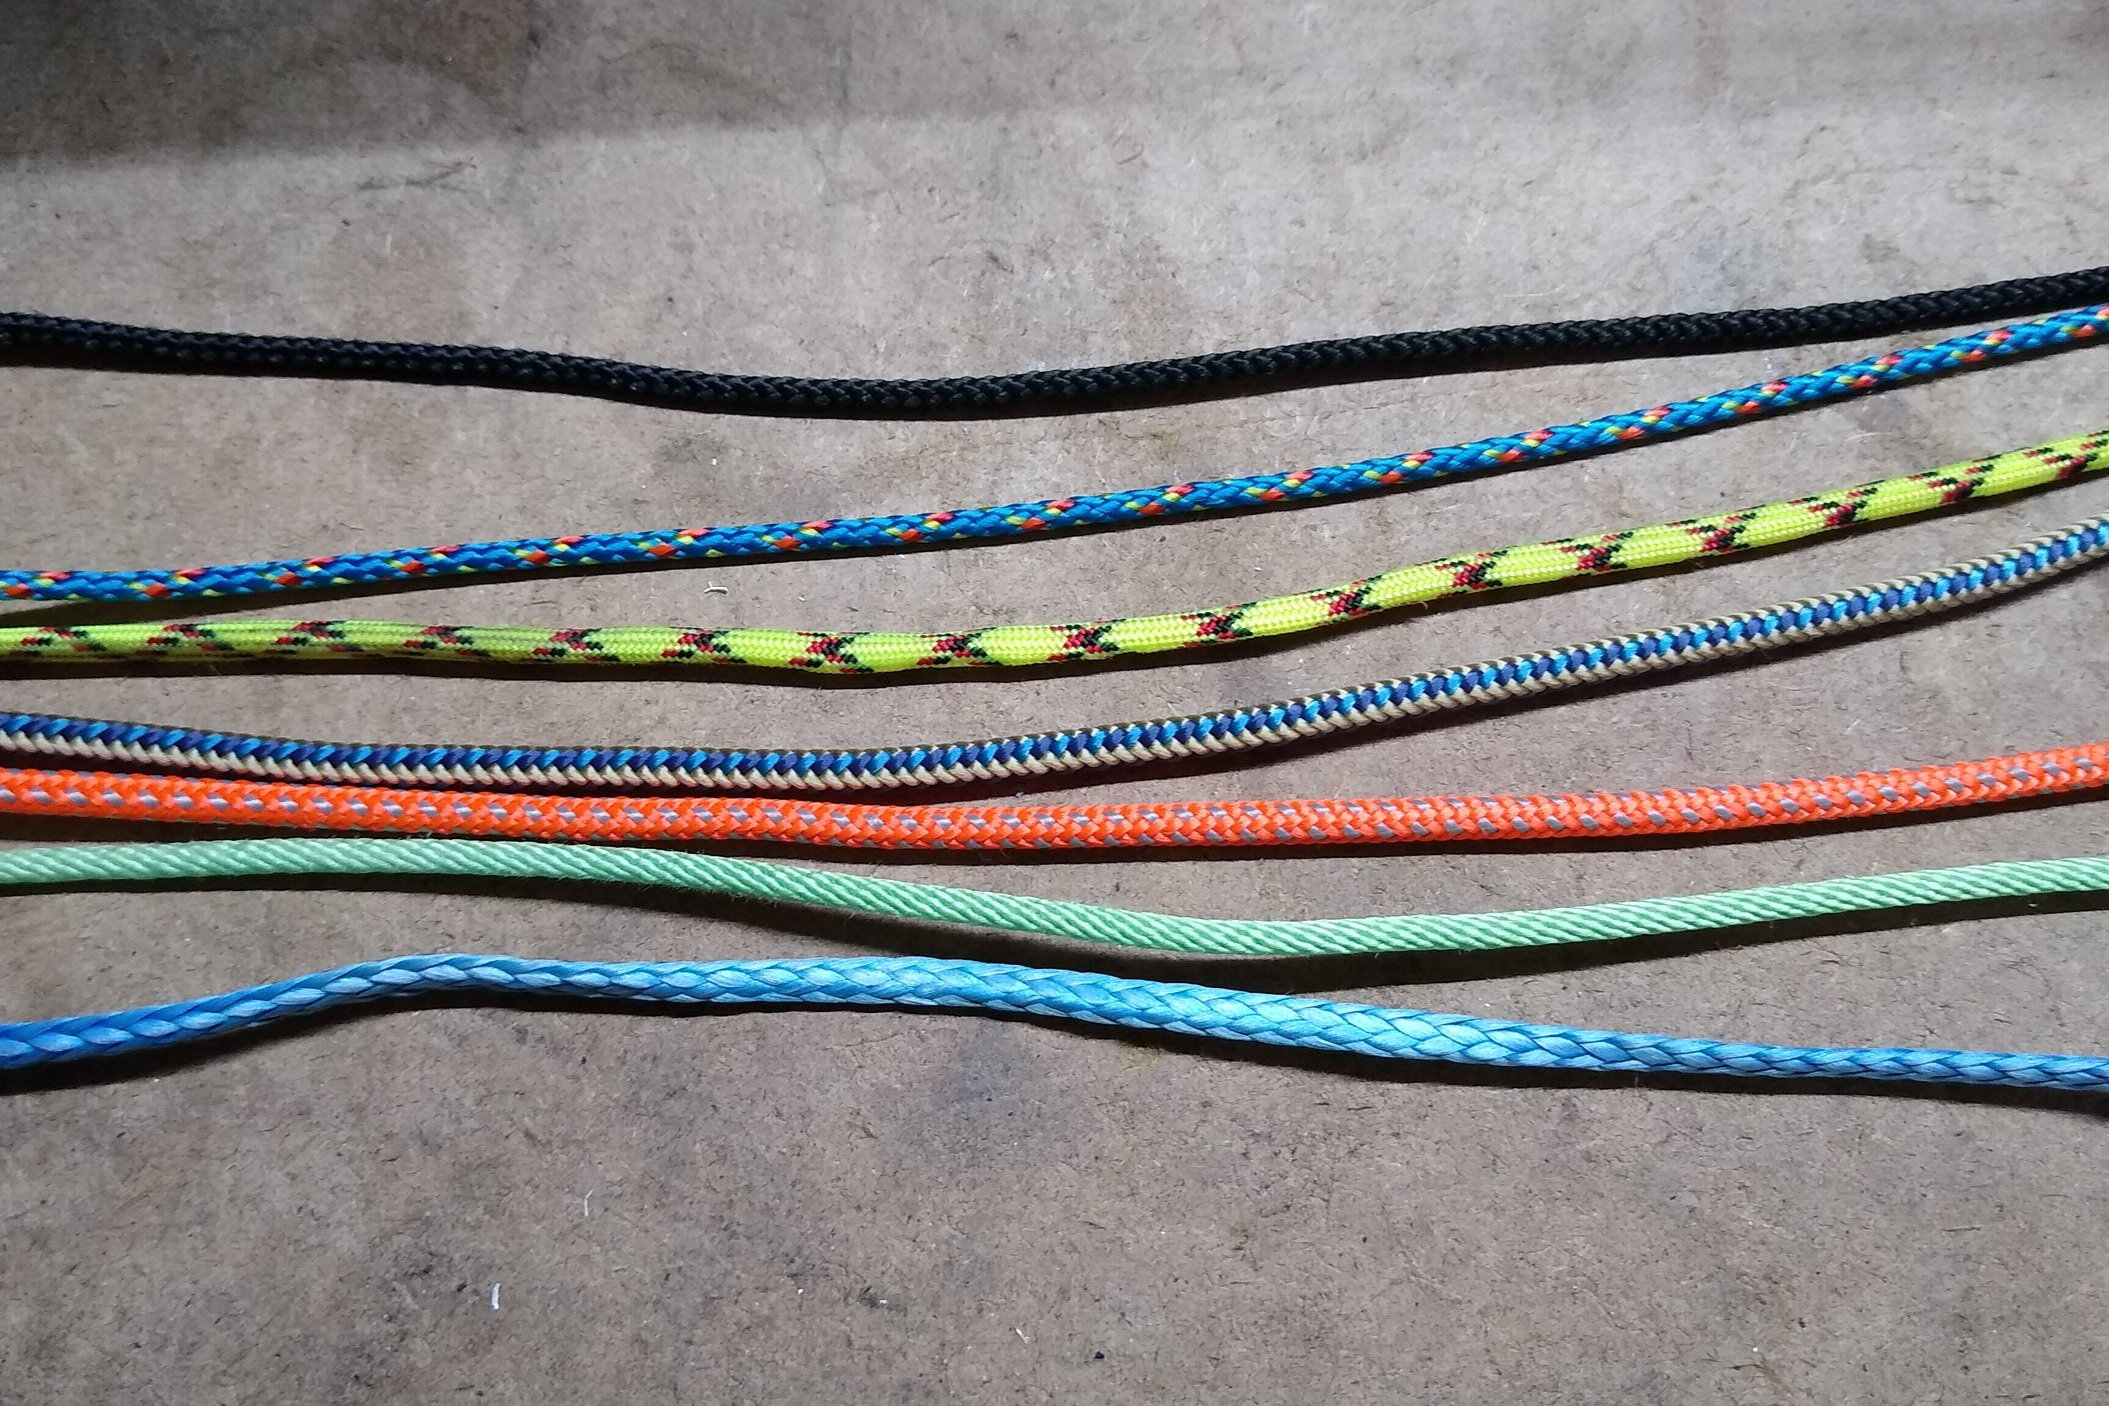 A selection of ropes we’ve been testing